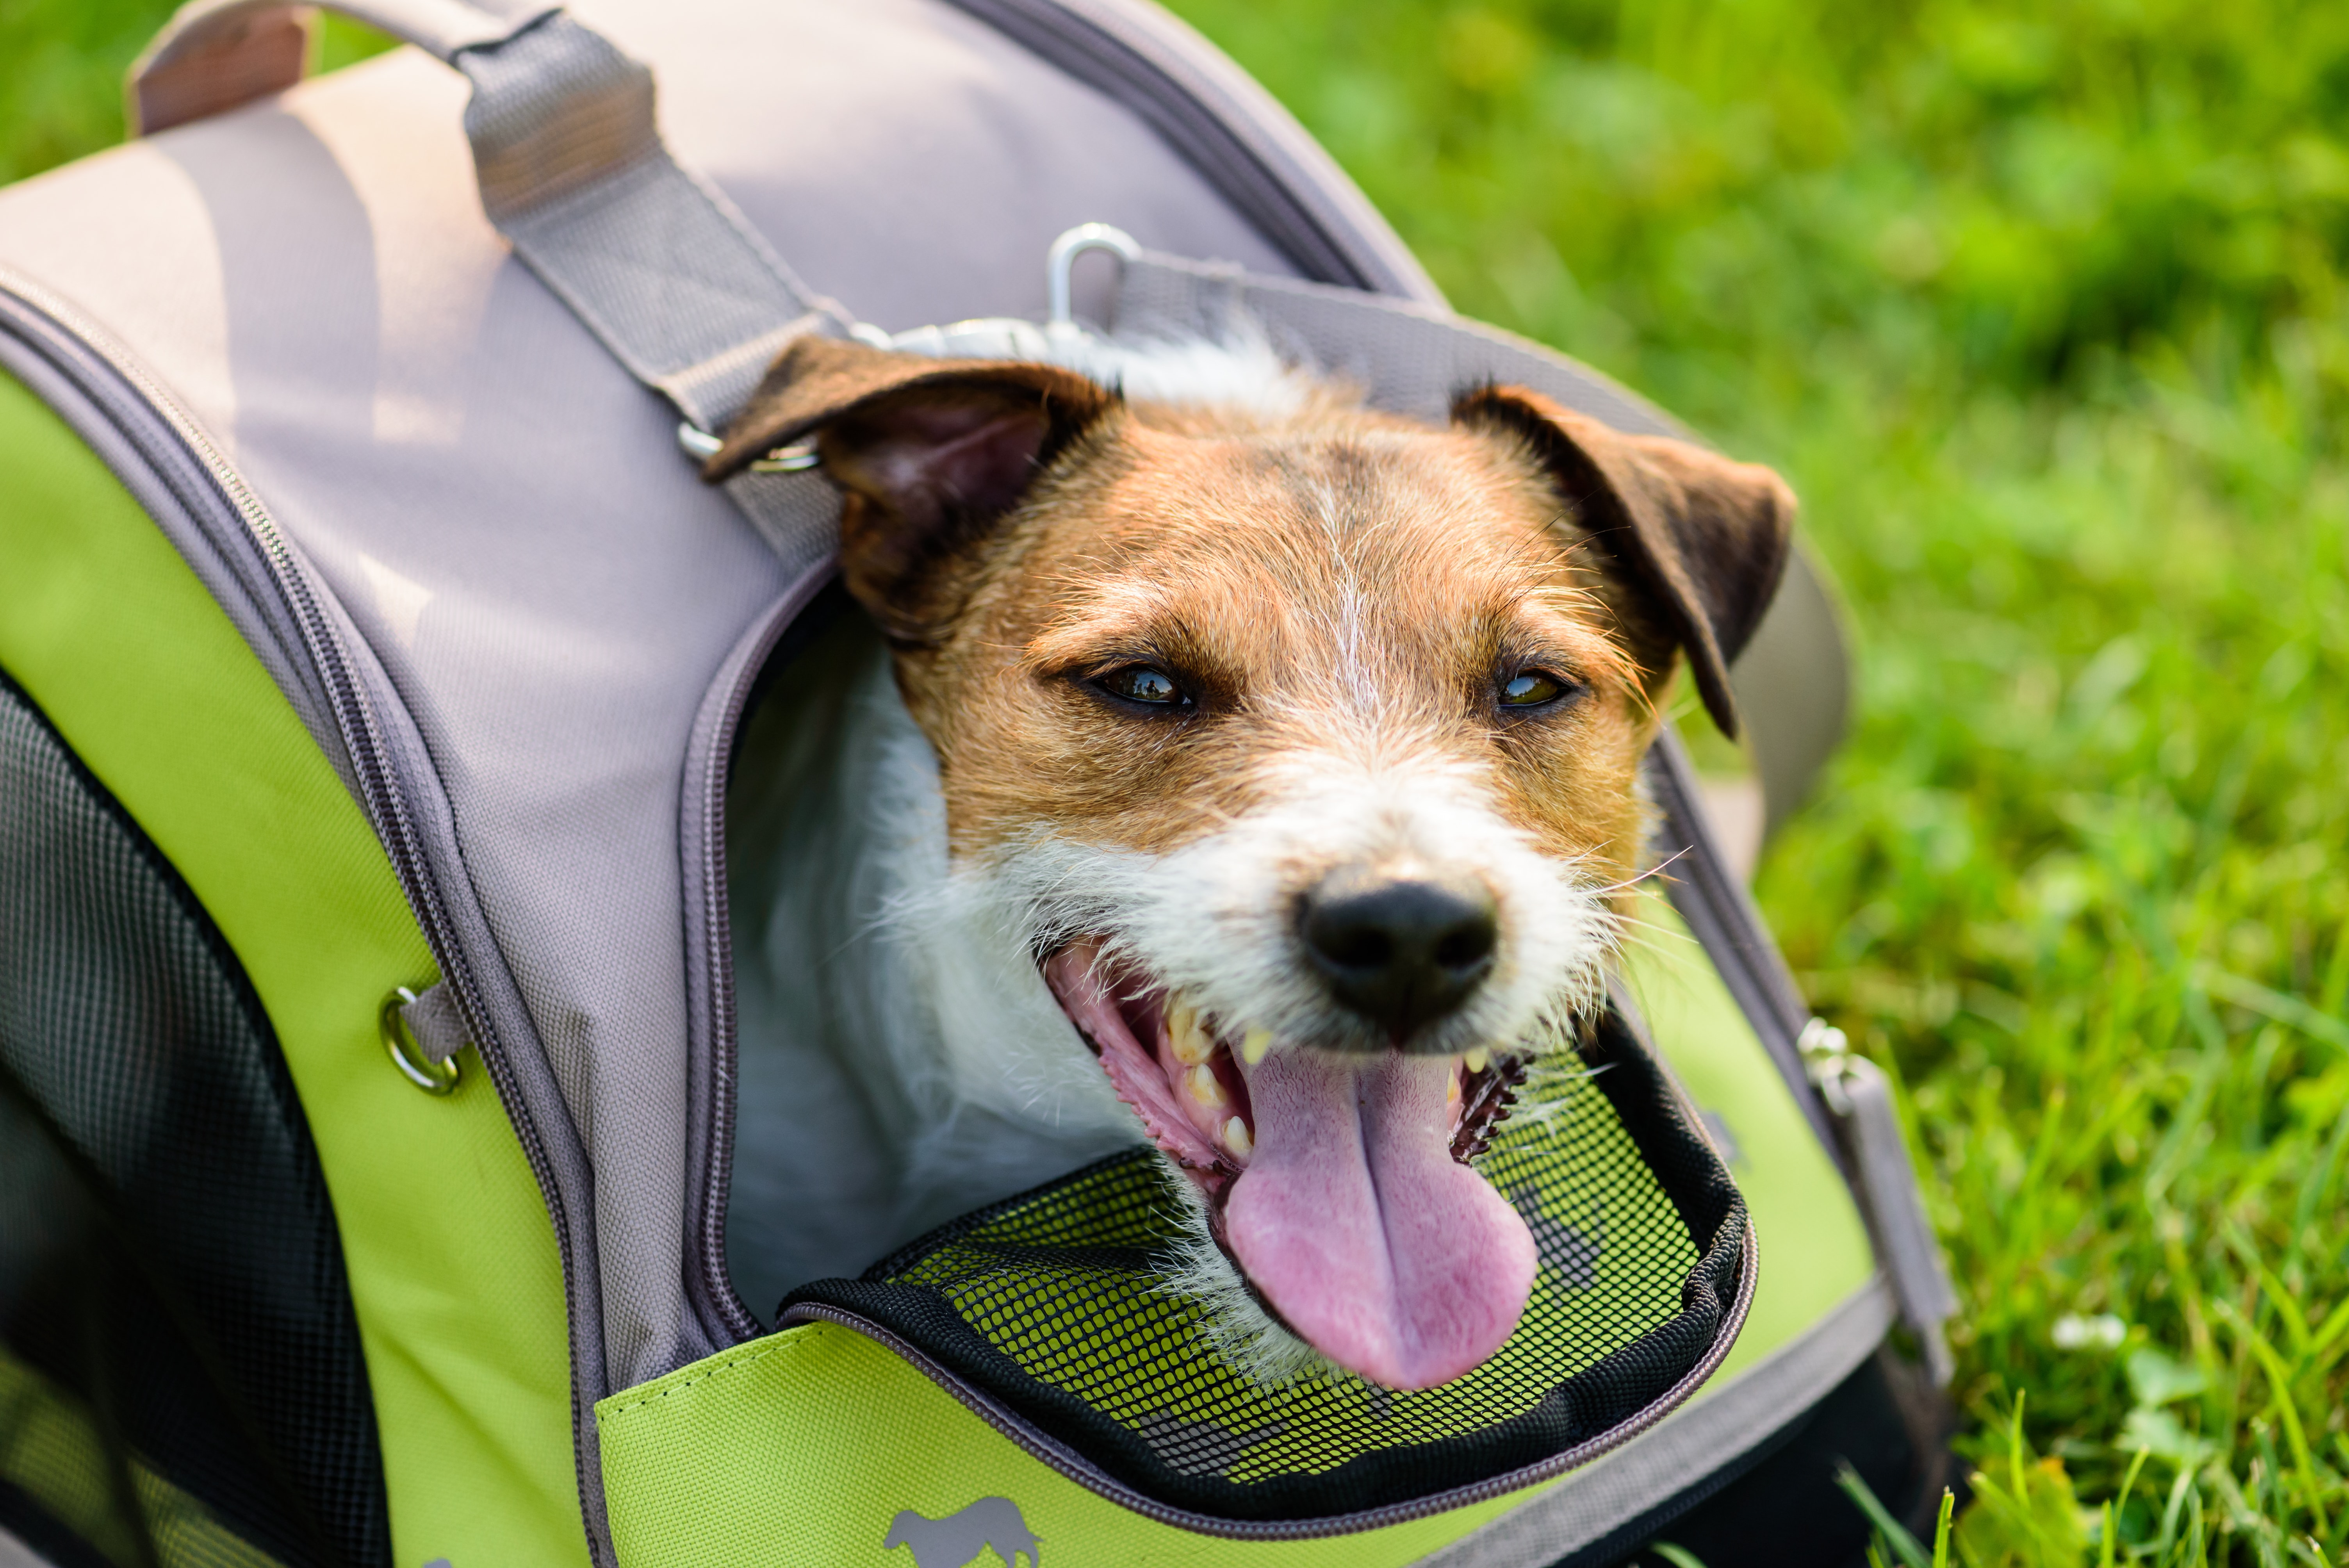 Buying Guide: How to Pick the Best Dog Carrier